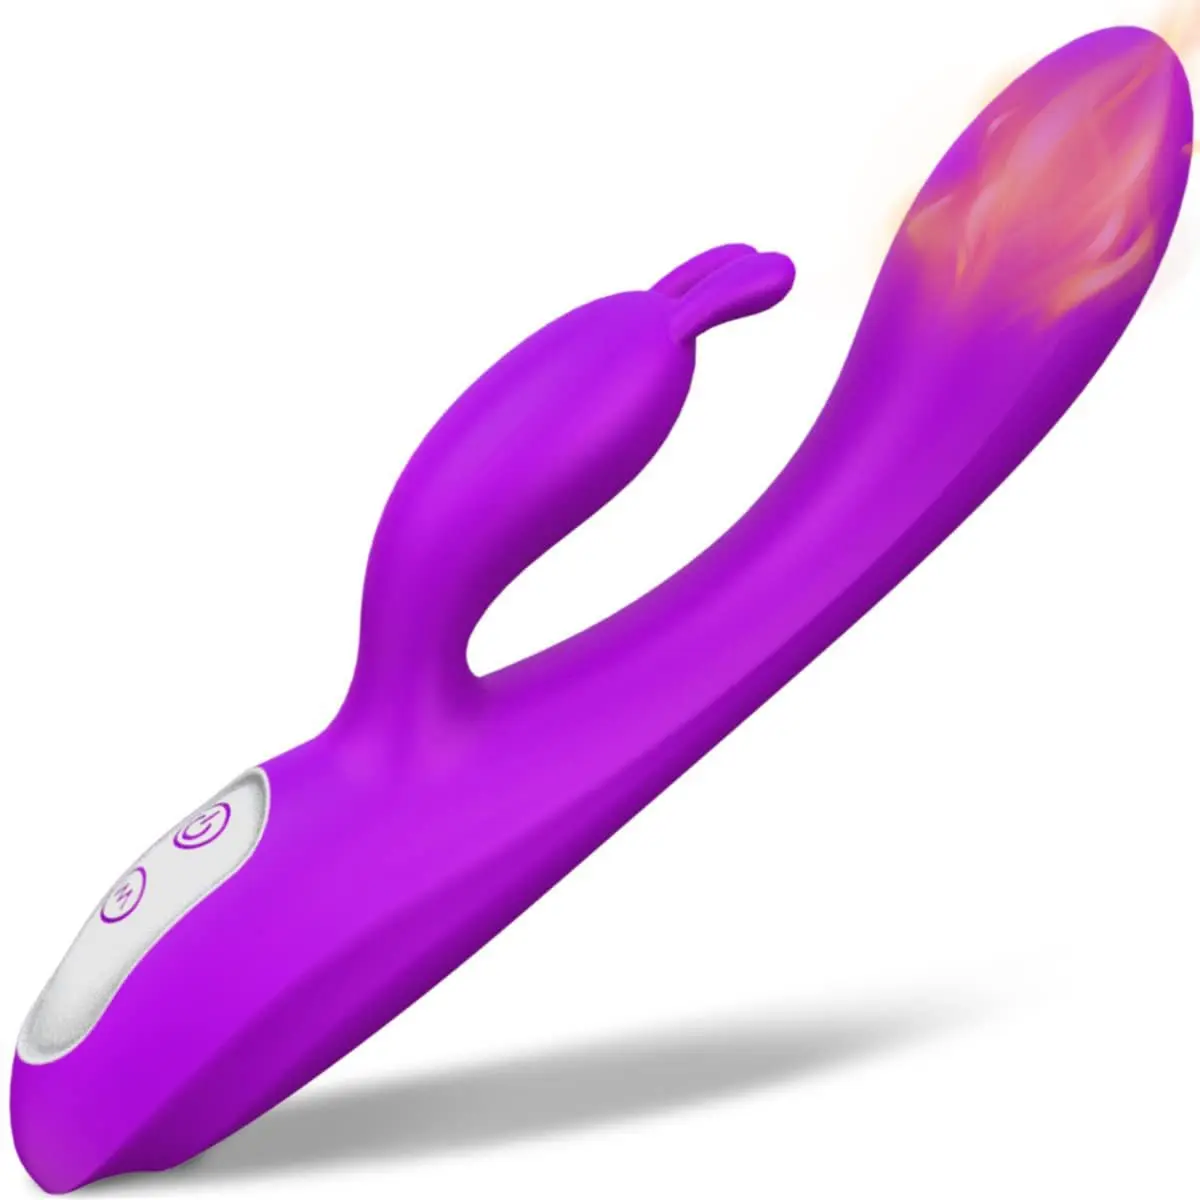 Lesbian Vibrator Dildo Pussy - Fast Delivery Best Selling Silicone Vagina Heating Sex Toy Rabbit Vibrator  For Women - Buy Rabbit Vibrator Free Porn Lesbian Rabbit Vibrator Sex Toy  Extra Large Vibrators For Women Telescopic,Vibrator Rabbit Sex